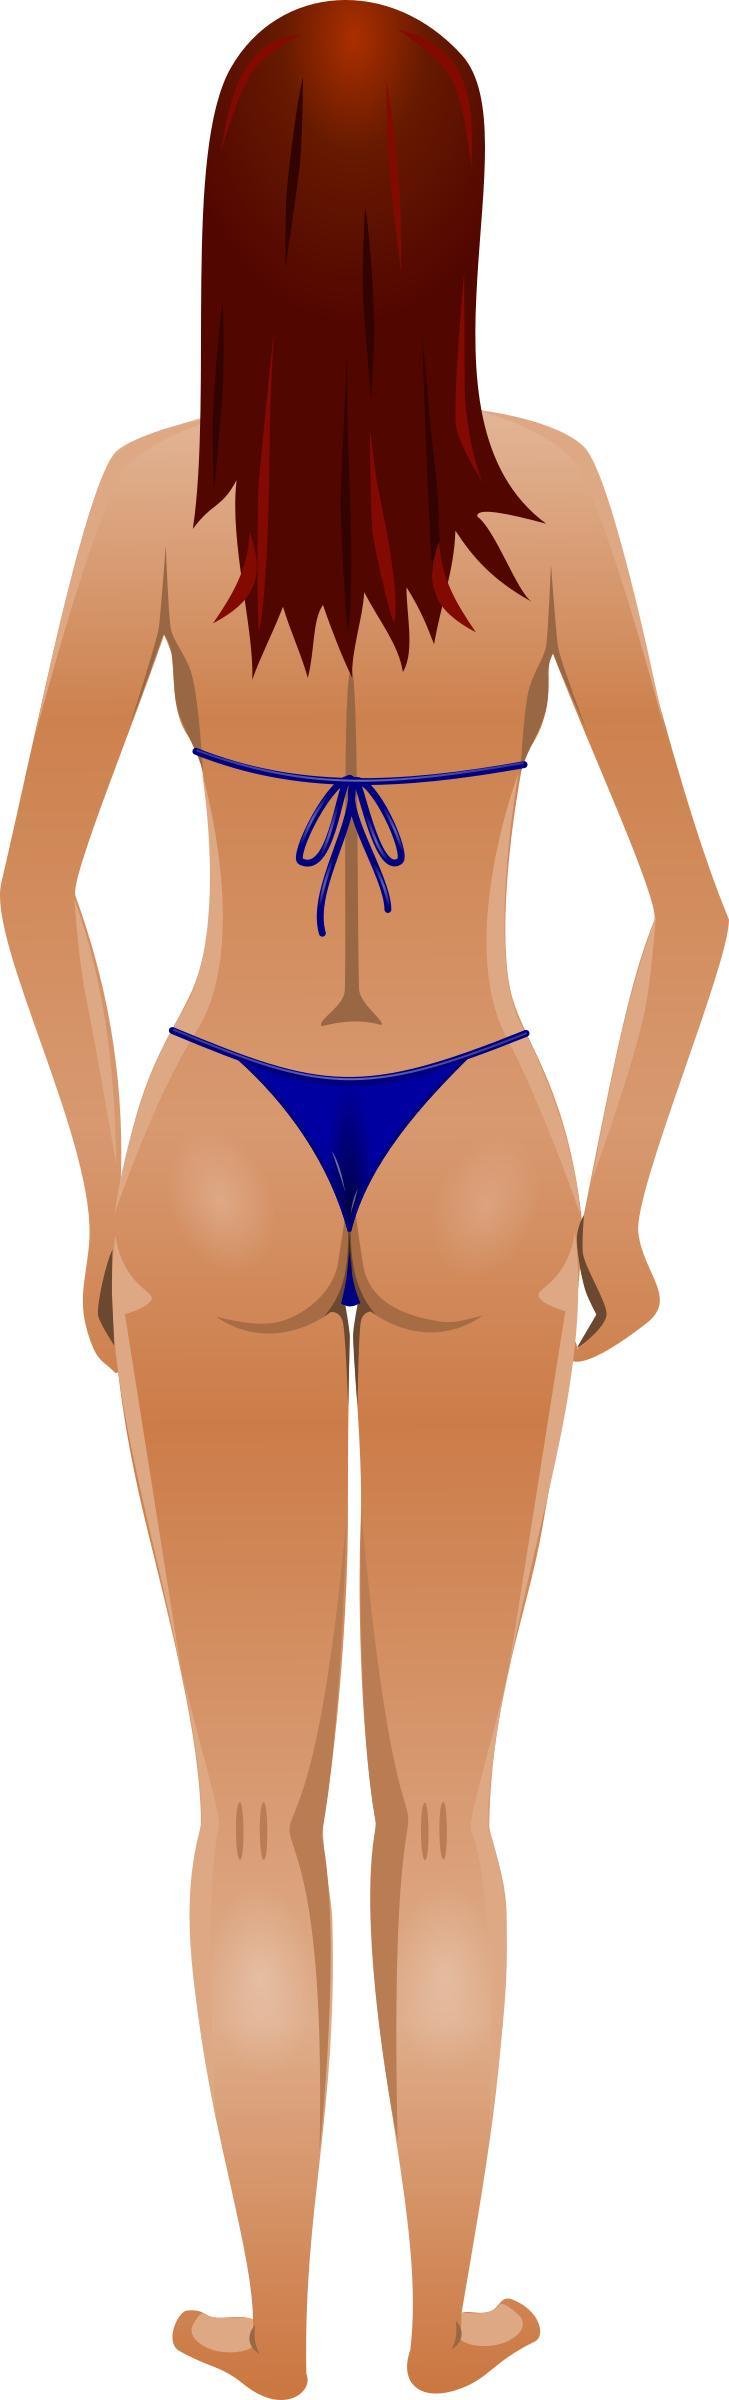 Young lady (light skin, blue bikini, red hair) png transparent